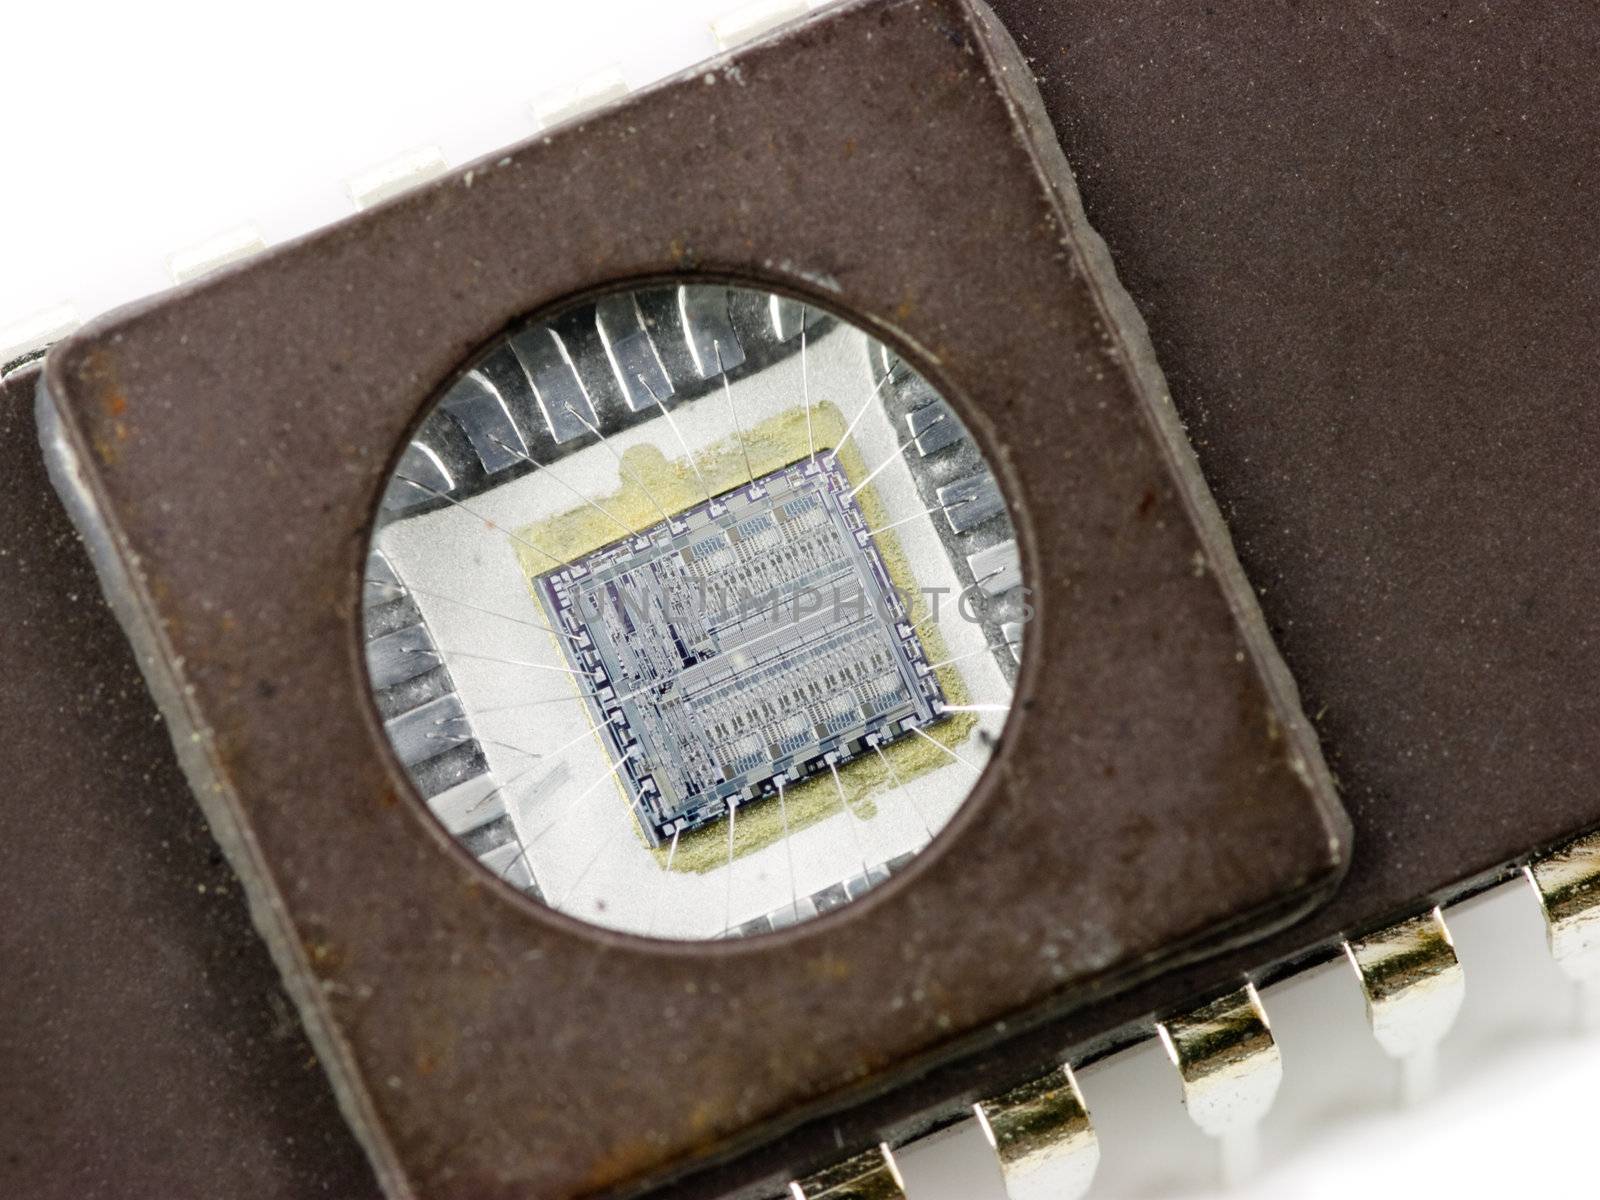 EPROM memory microchip with a transparent window, showing the integrated circuit inside